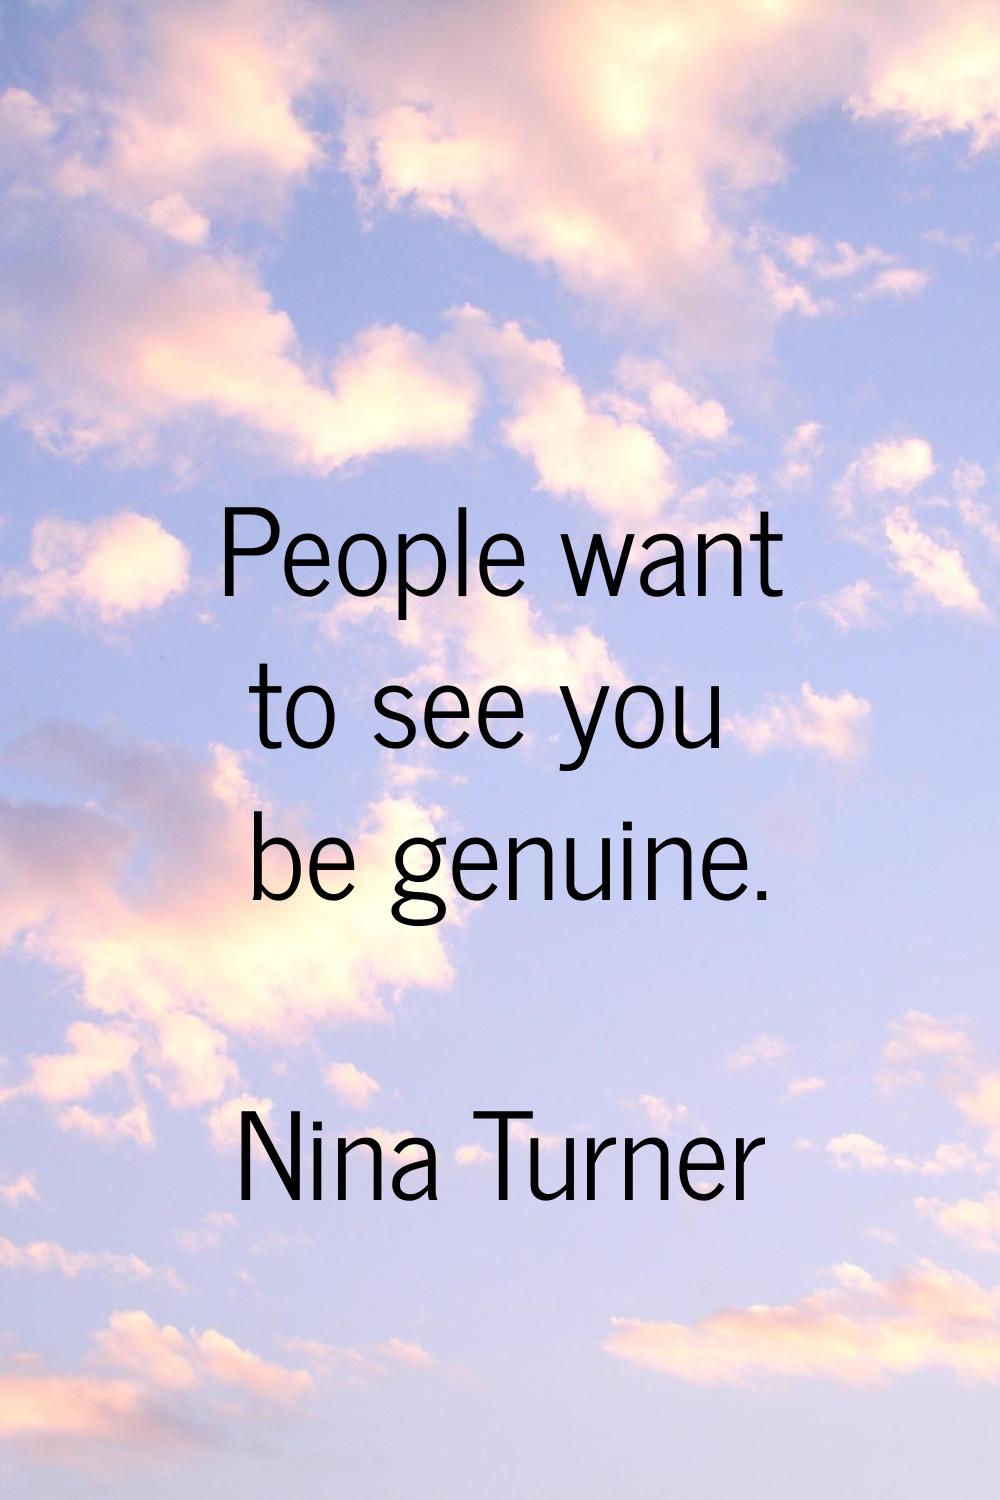 People want to see you be genuine.